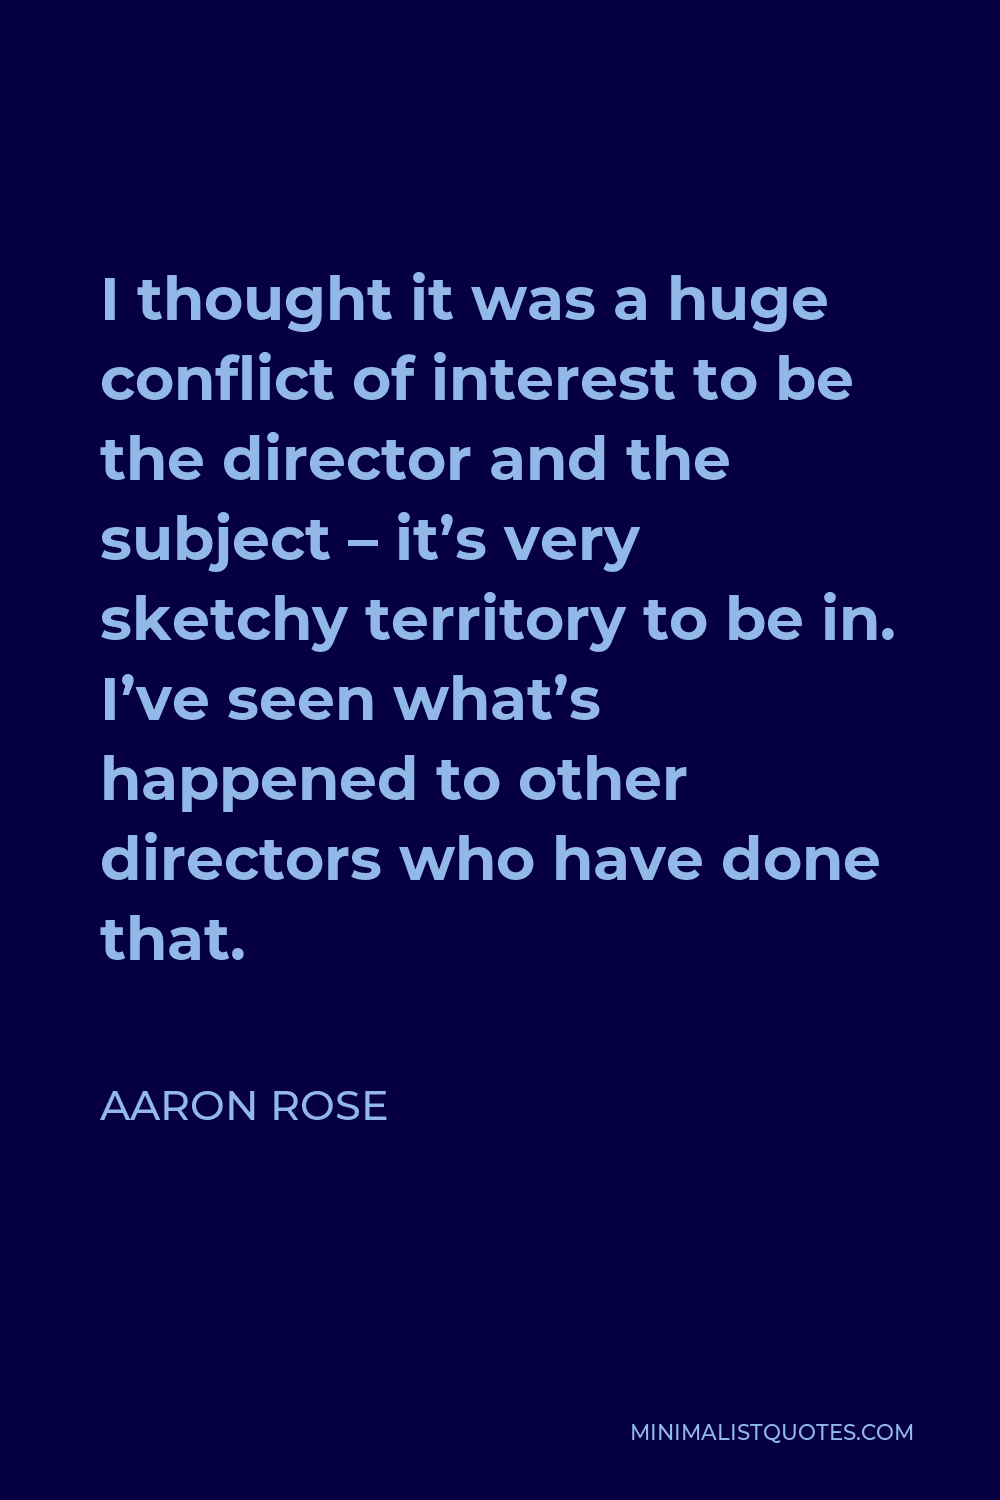 Aaron Rose Quote - I thought it was a huge conflict of interest to be the director and the subject – it’s very sketchy territory to be in. I’ve seen what’s happened to other directors who have done that.